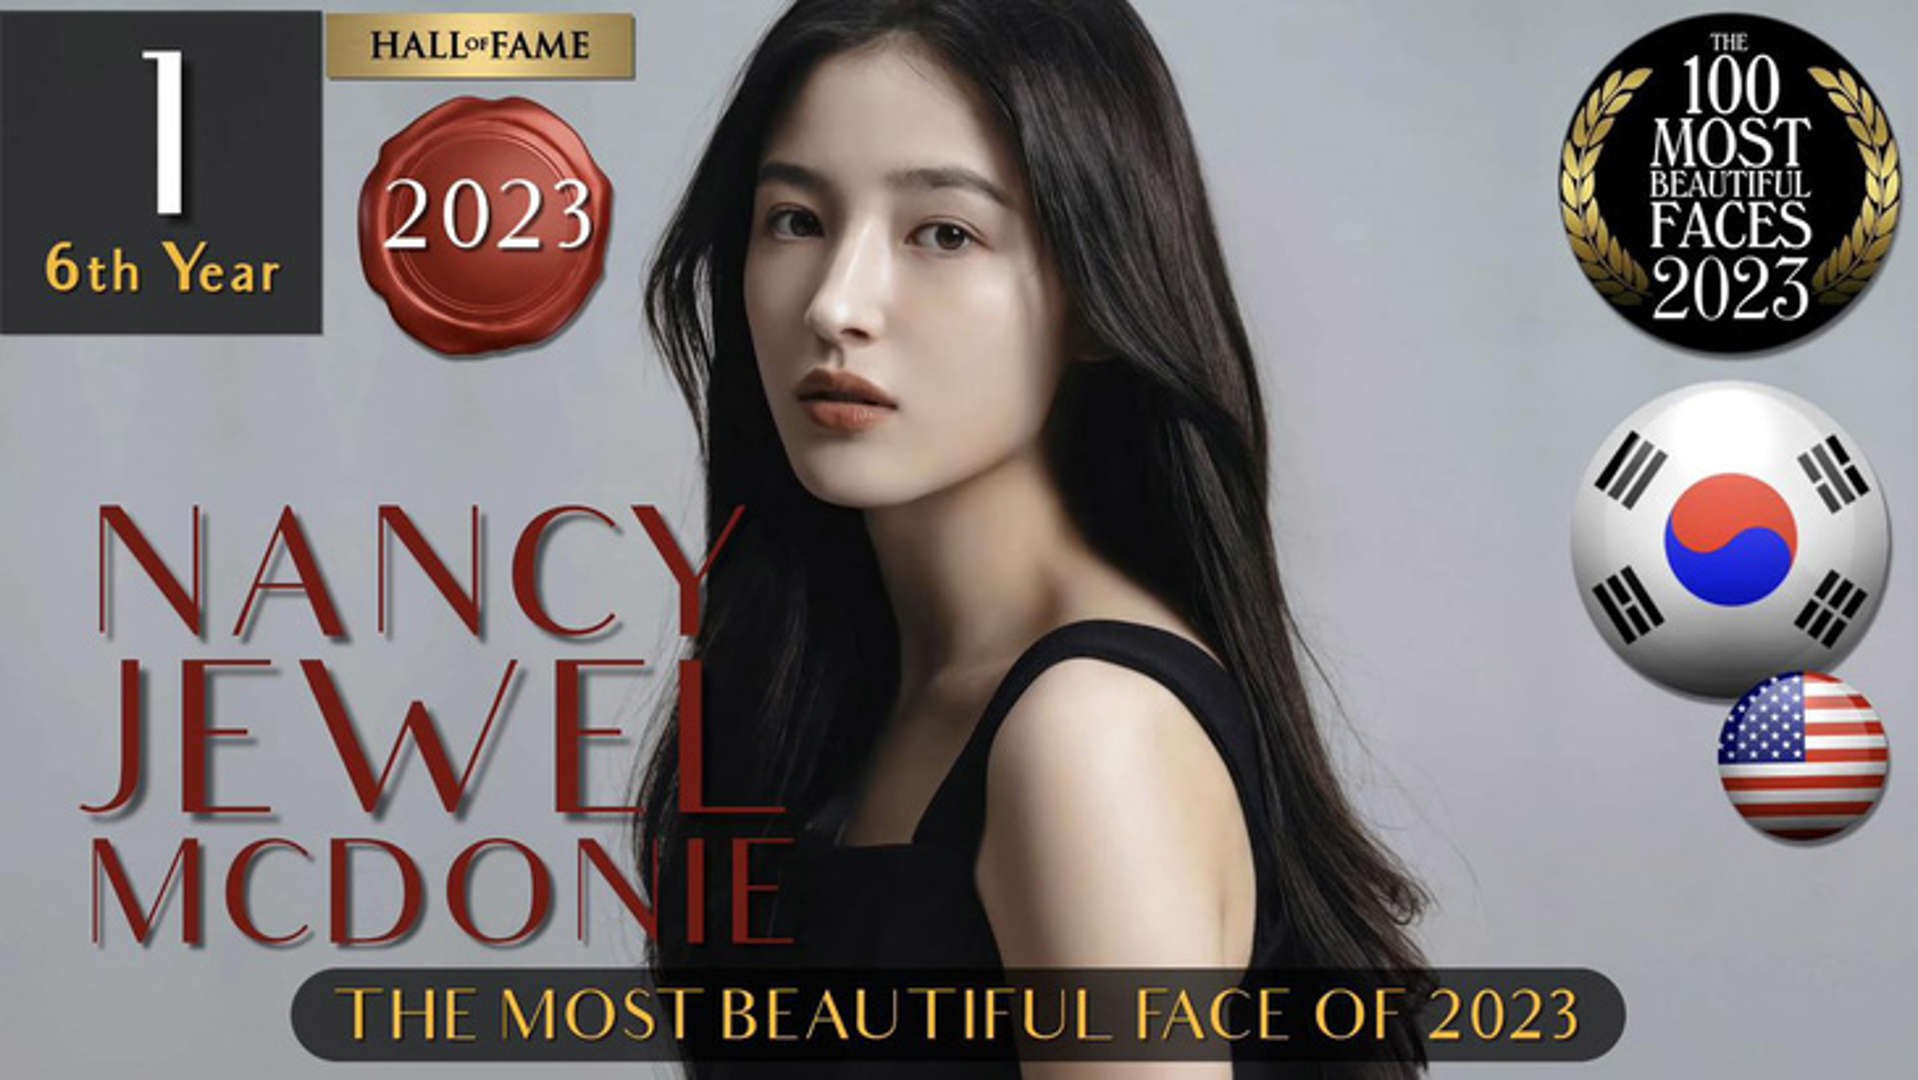 Top 10 Most Handsome & Beautiful Faces in the World According to TC